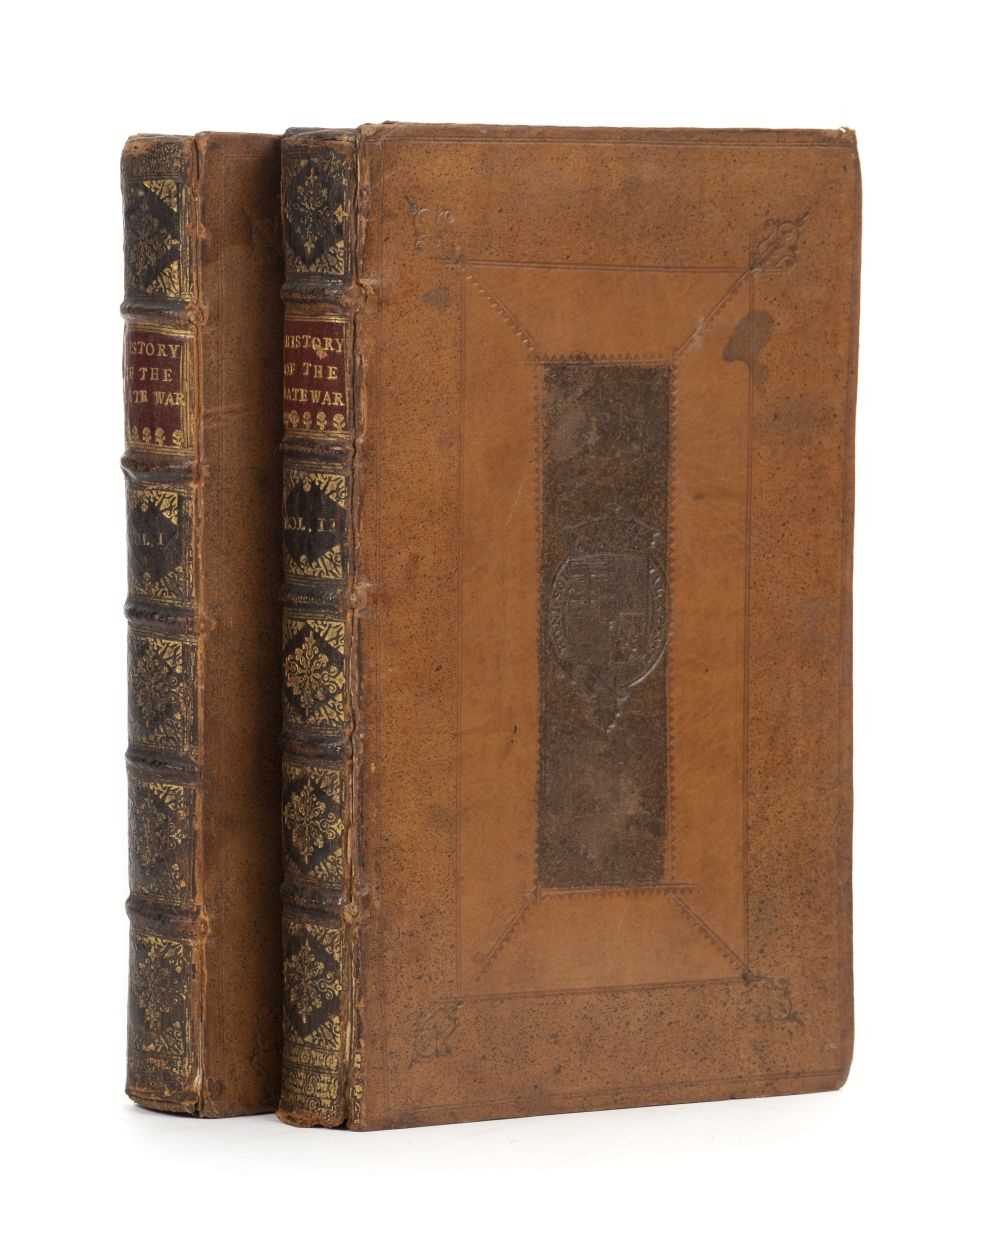 Lot 4 - Brodrick (Thomas). A Compleat History of the Late War in the Netherlands, 1713